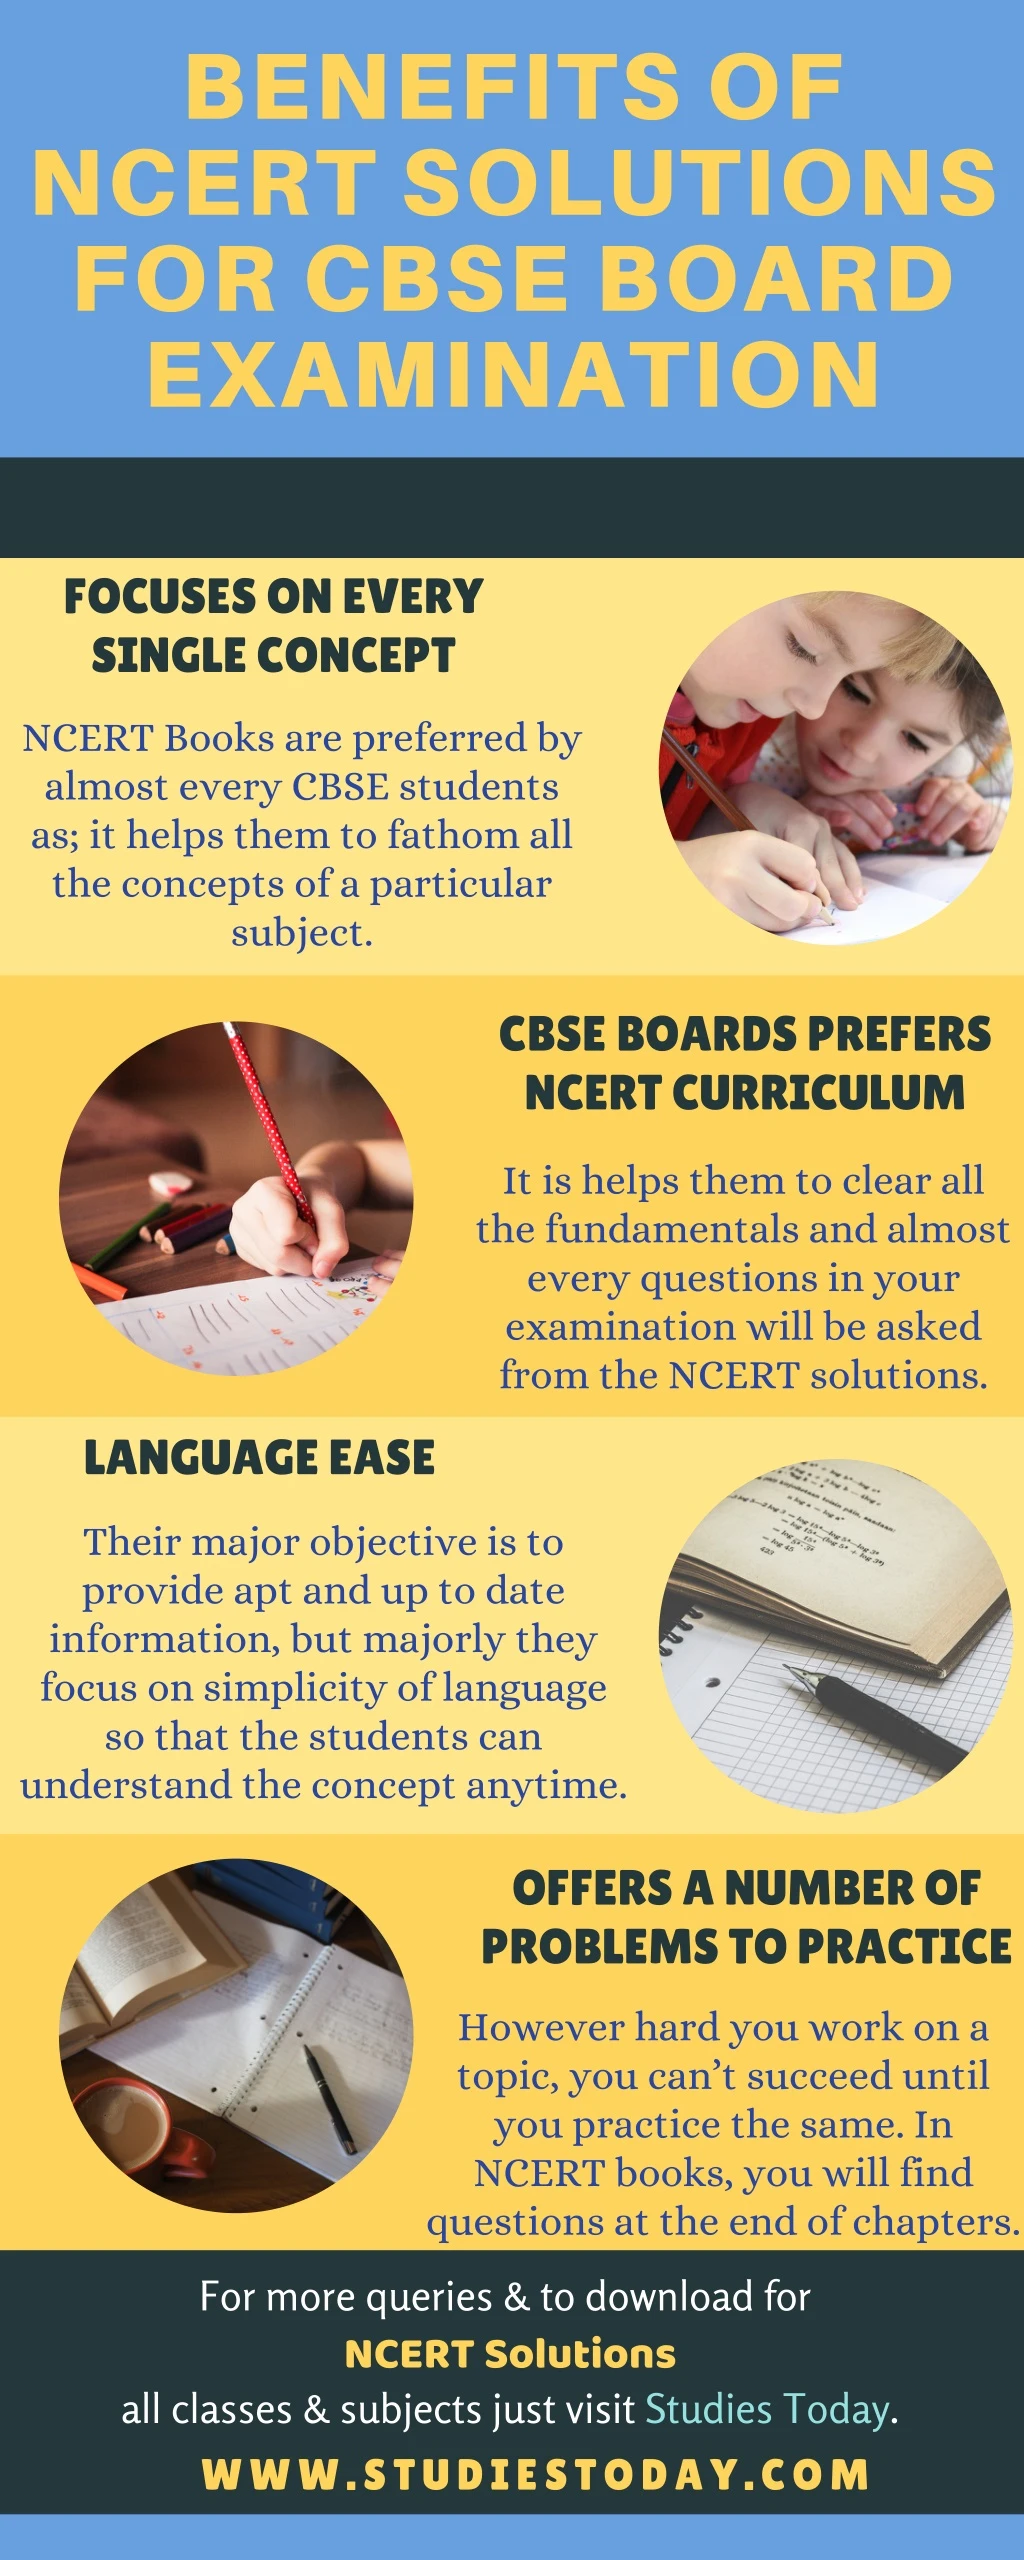 benefits of ncert solutions for cbse board